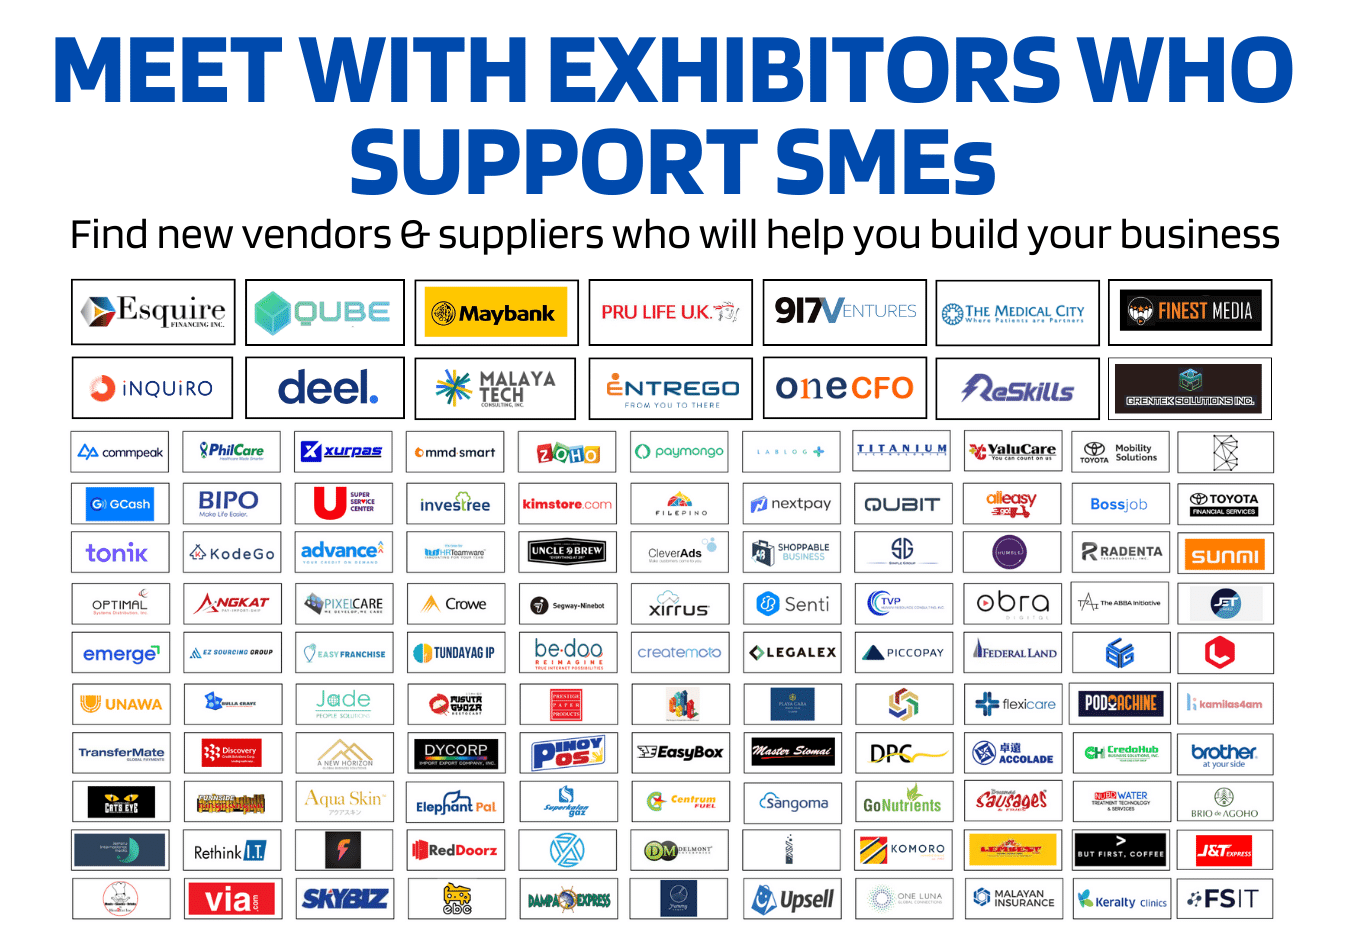 Meet with Exhibitors that support SMEs